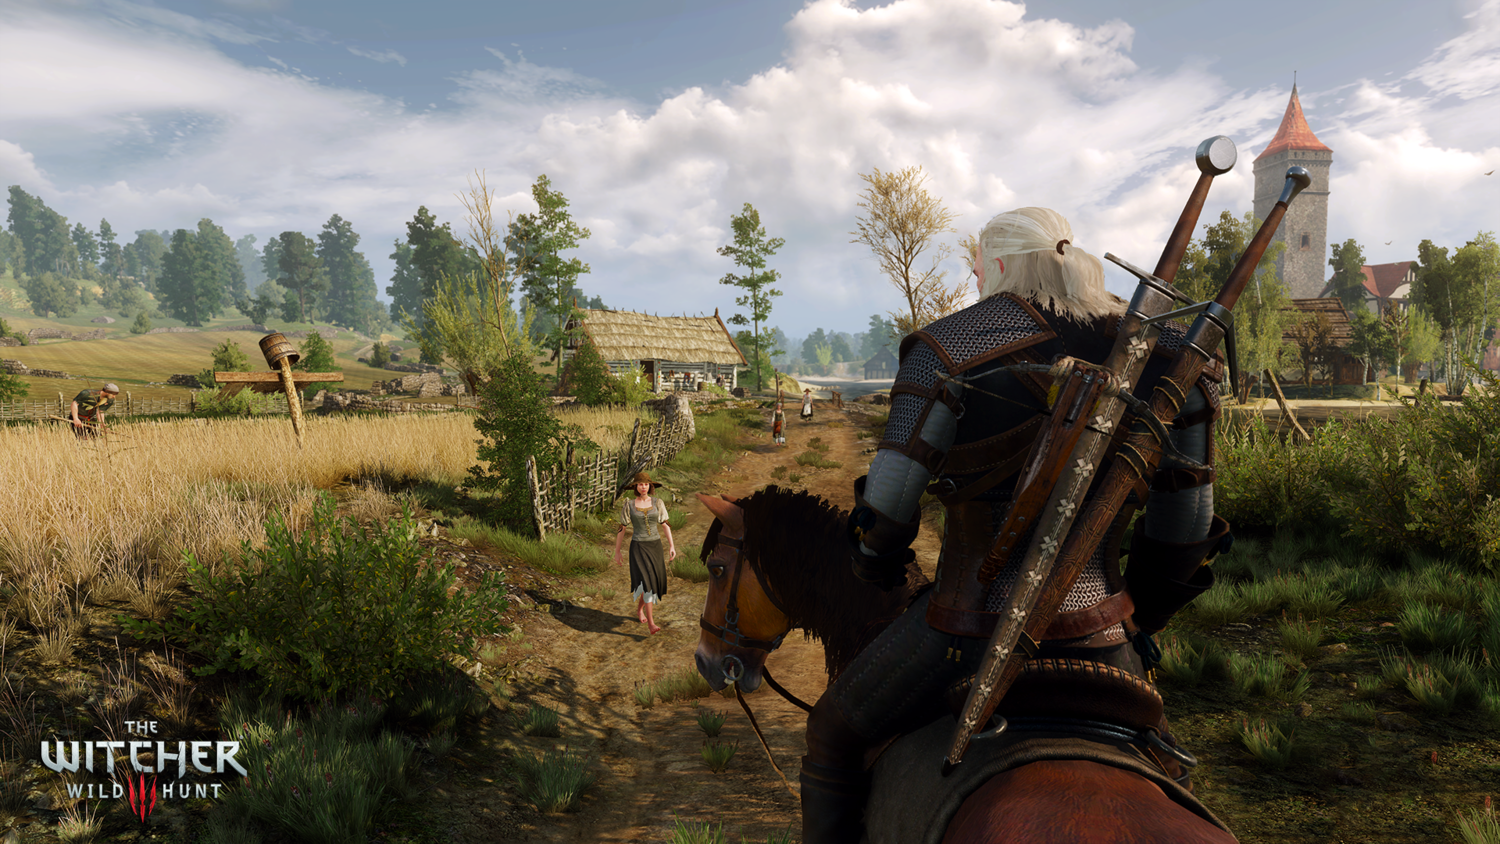 Скриншот 2 к игре The Witcher 3: Wild Hunt  + The Witcher 3 HD Reworked Project (mod v. 12.0) (2015) PC | Repack от xatab